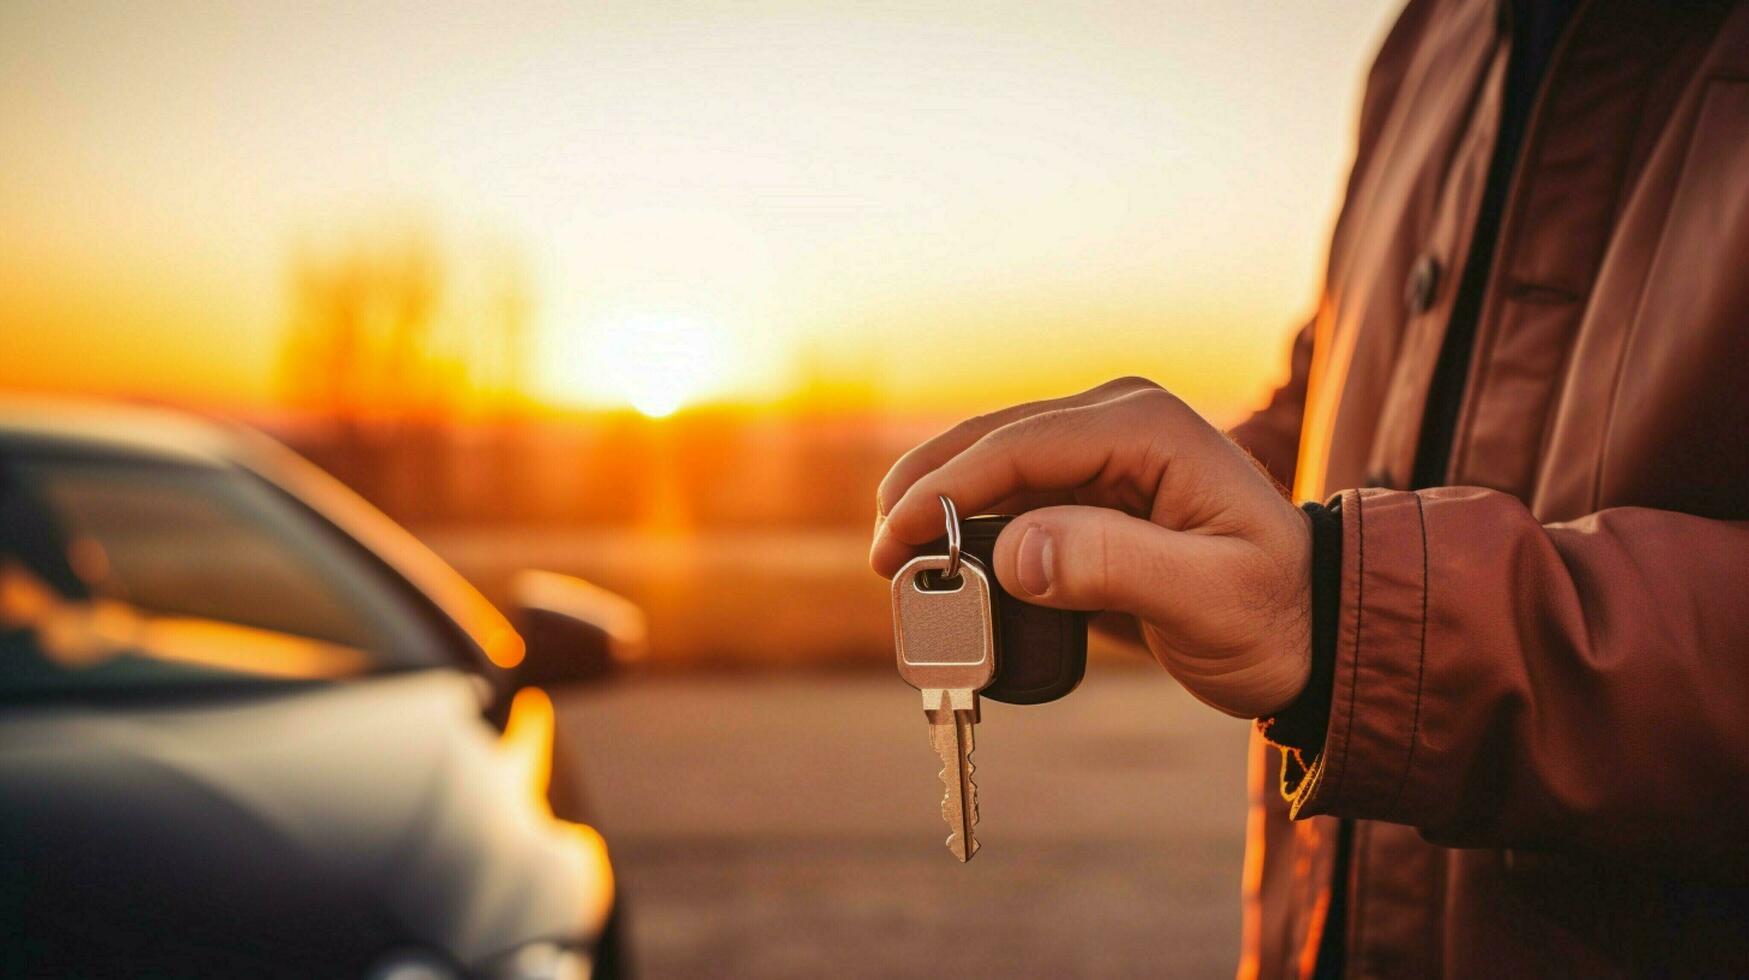 driver holding car key ready to drive photo